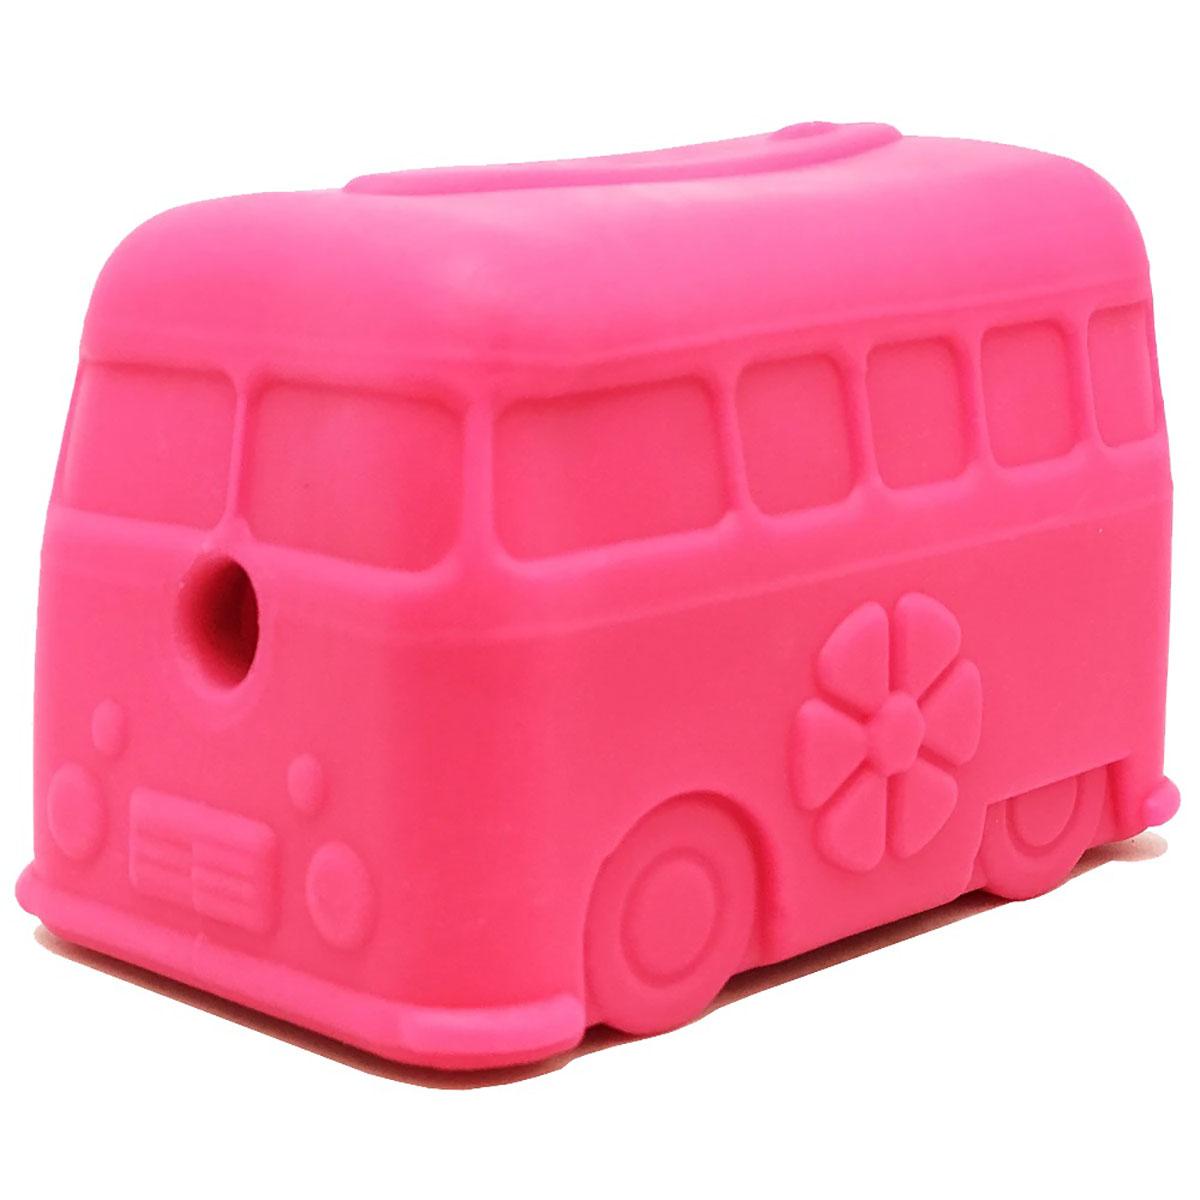 SodaPup Natural Rubber Surf's Up Retro Van Dog Toy - Pink